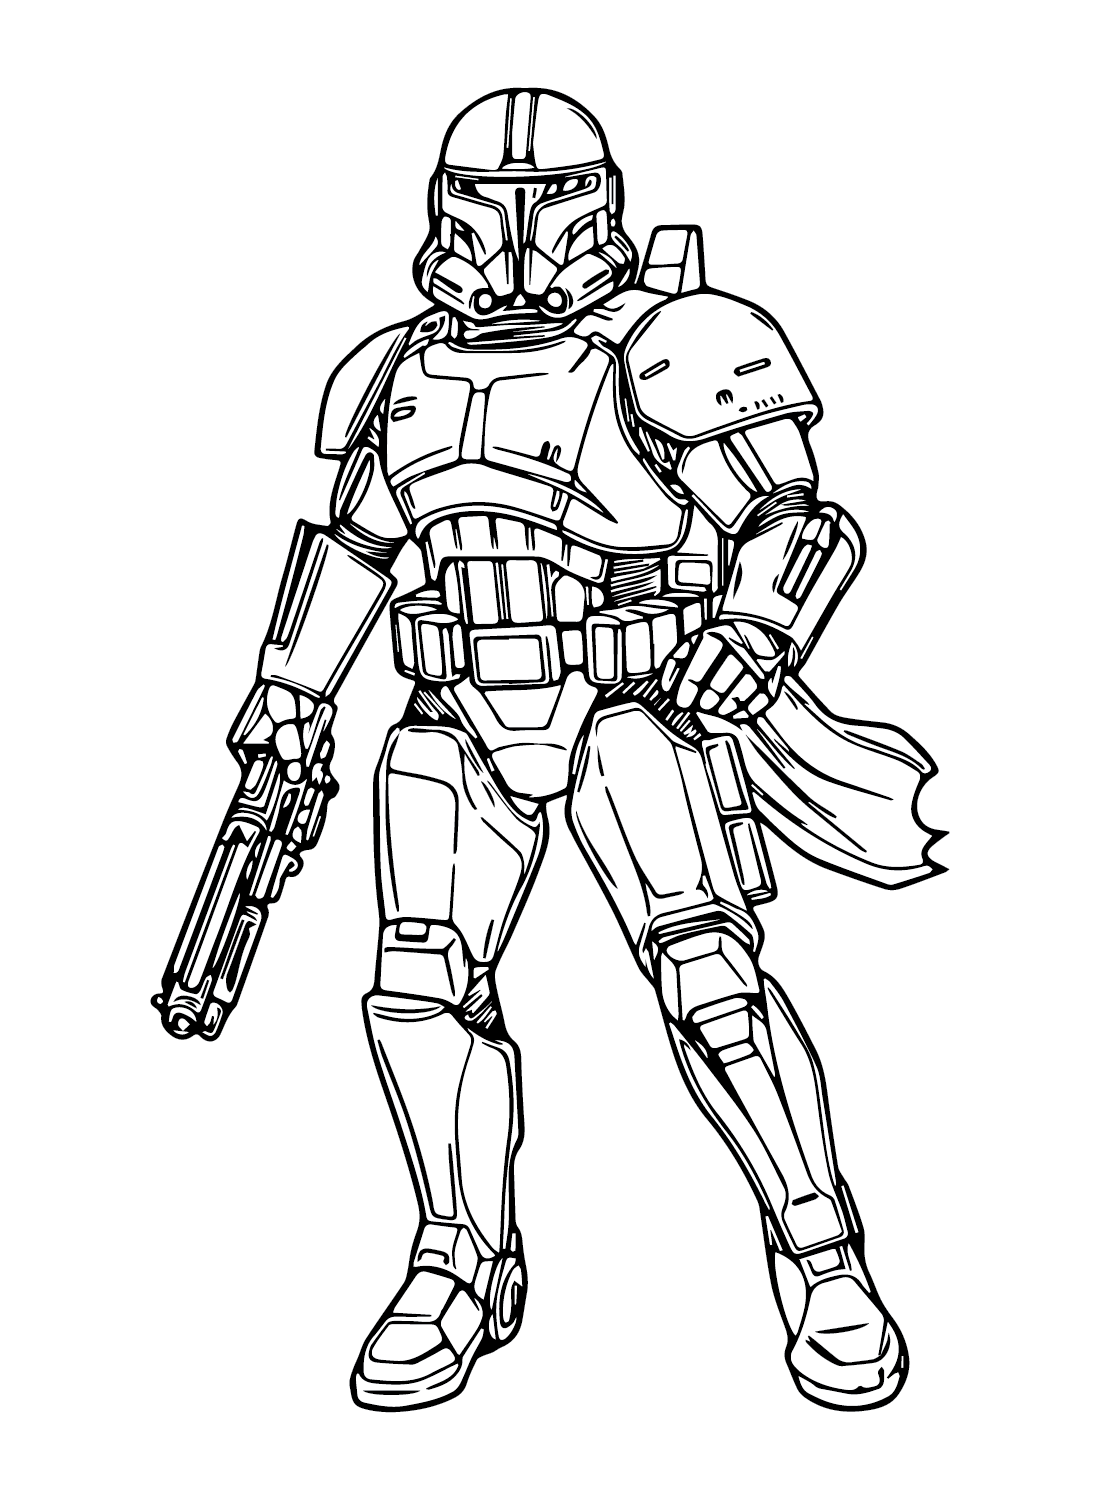 The Shock Trooper Coloring Page